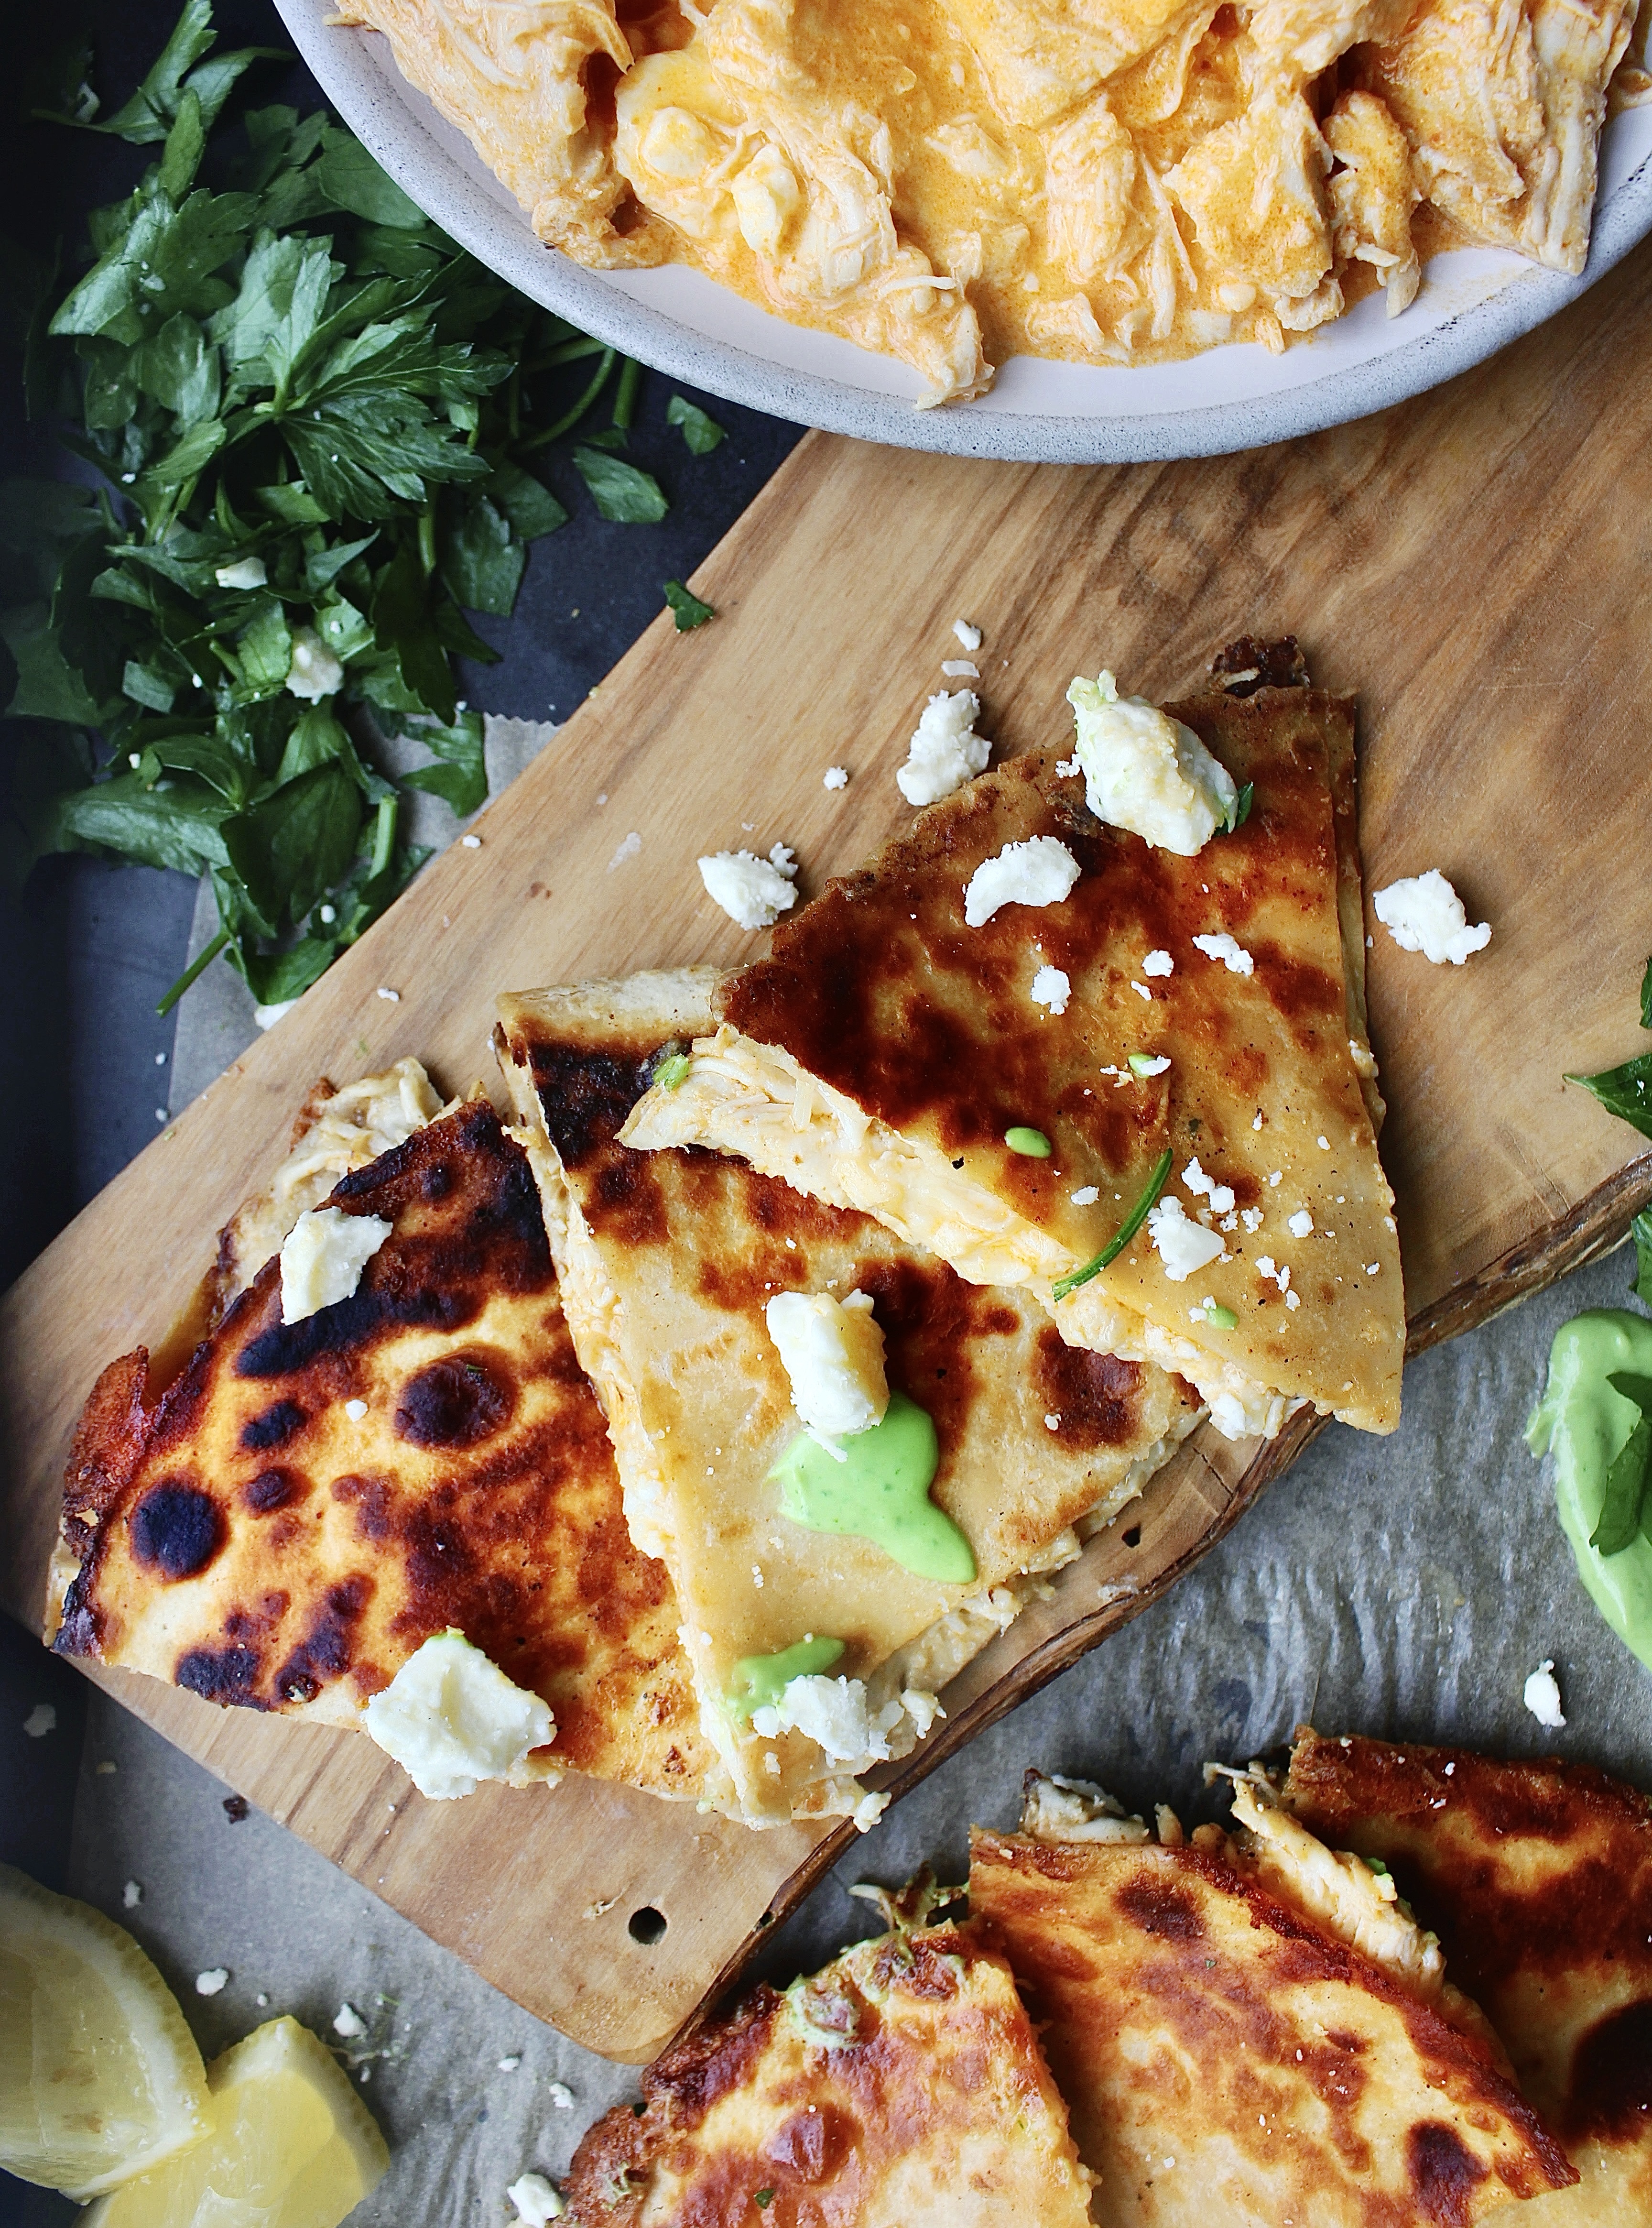 Saucy, creamy, and perfectly spiced, these Buffalo Chicken Quesadillas with Avocado Crema are packed with shredded buffalo chicken, all the cheese, and are dipped into a soothing avocado crema. There’s nothing better!!